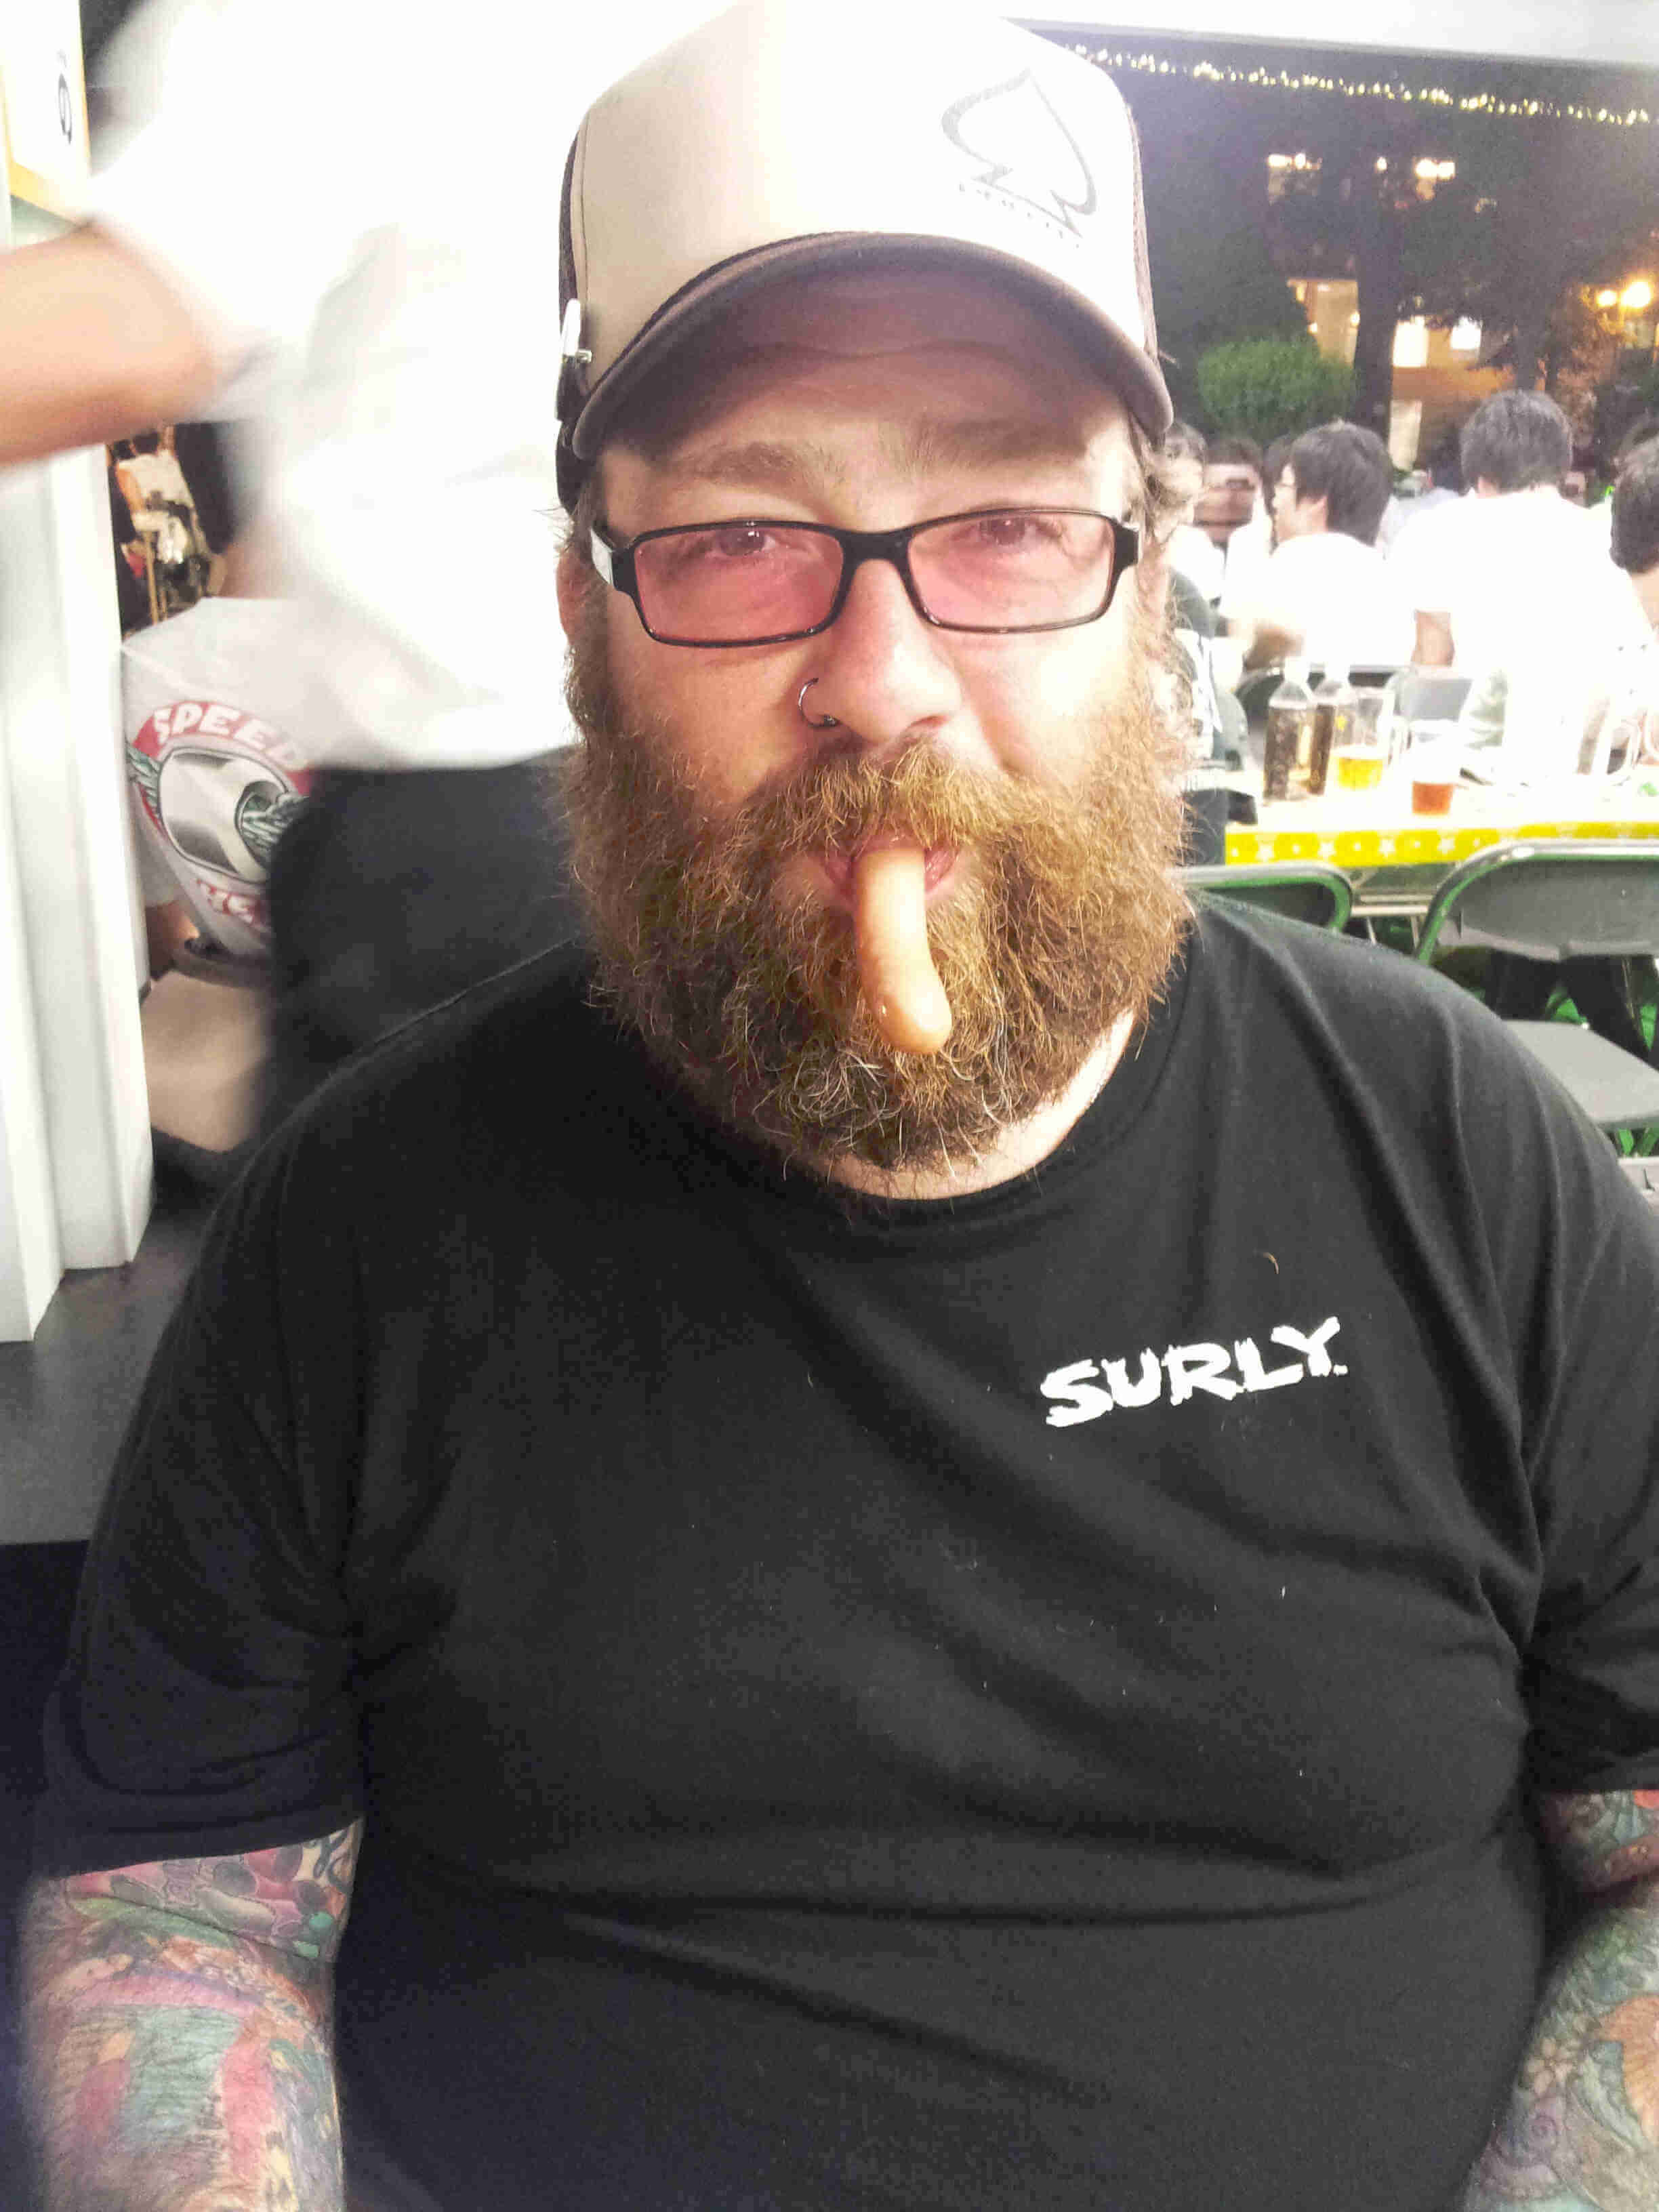 Front, waist up view of a person with a beard, and piece of food hanging from their mouth, wearing a black Surly t-shirt